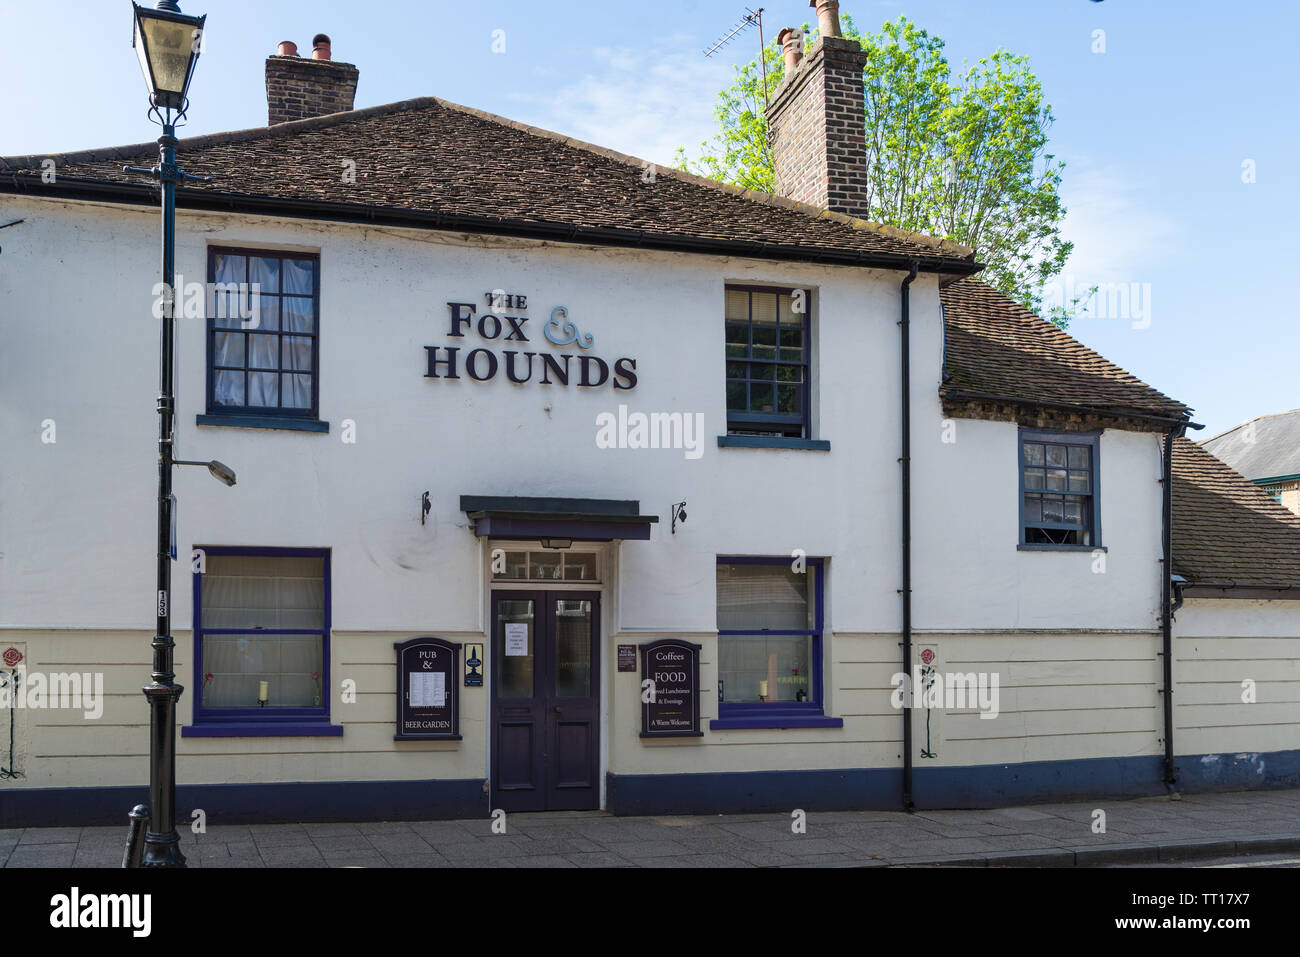 The Fox and Hounds public house in High Street, Rickmansworth Stock Photo